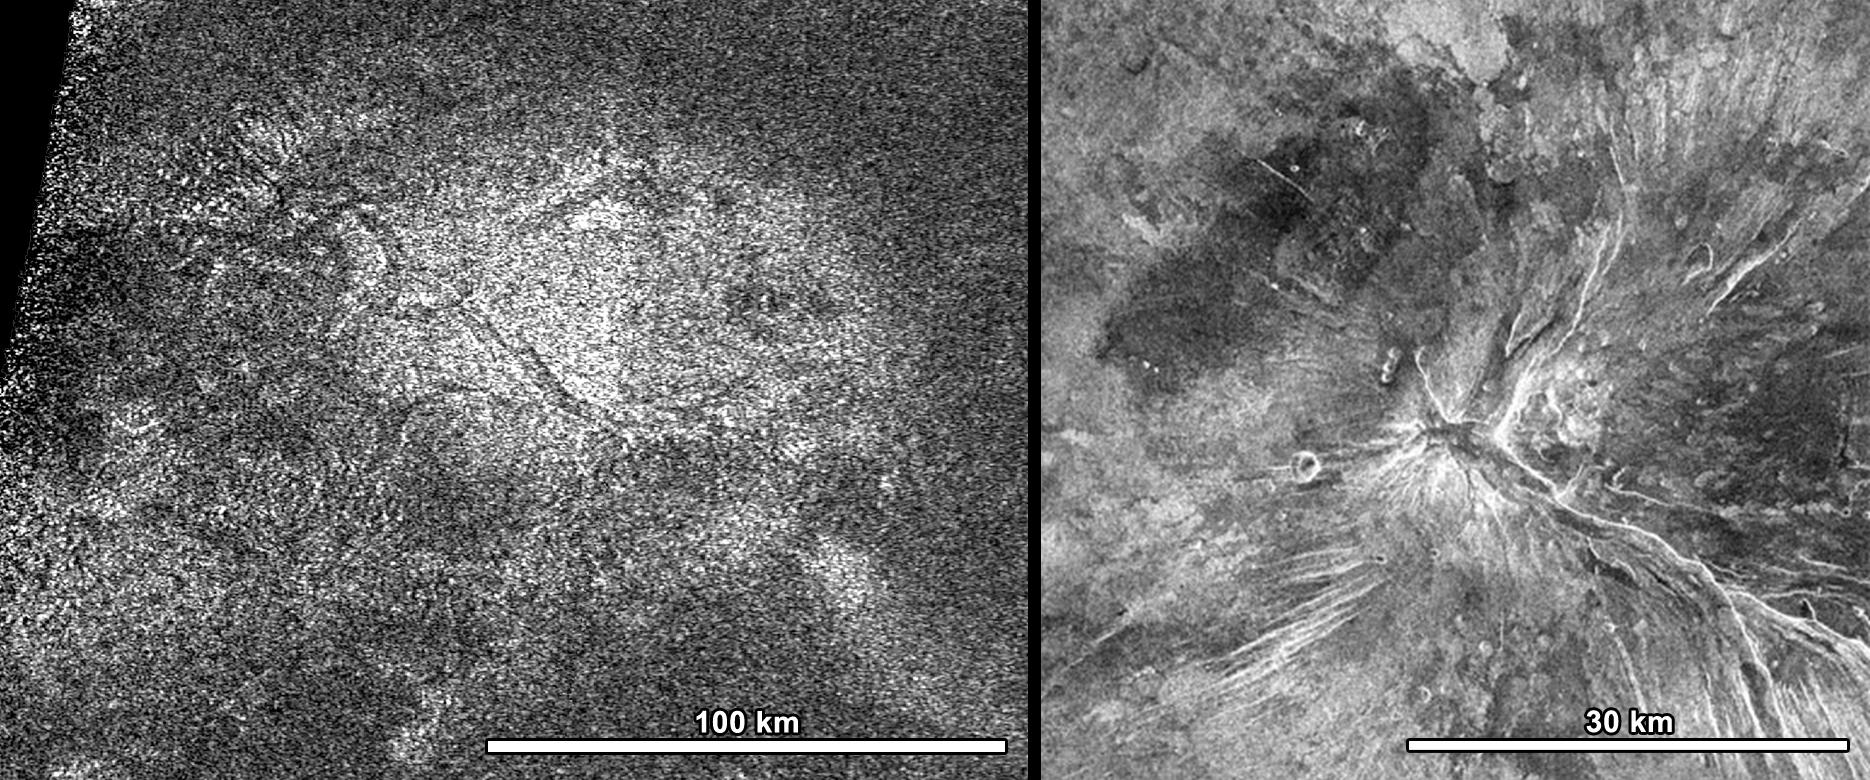 NASA’s Cassini spacecraft obtained this image of a feature shaped like a hot cross bun in the northern region of Titan (left) that bears a striking resemblance to a similar feature on Venus (right). 